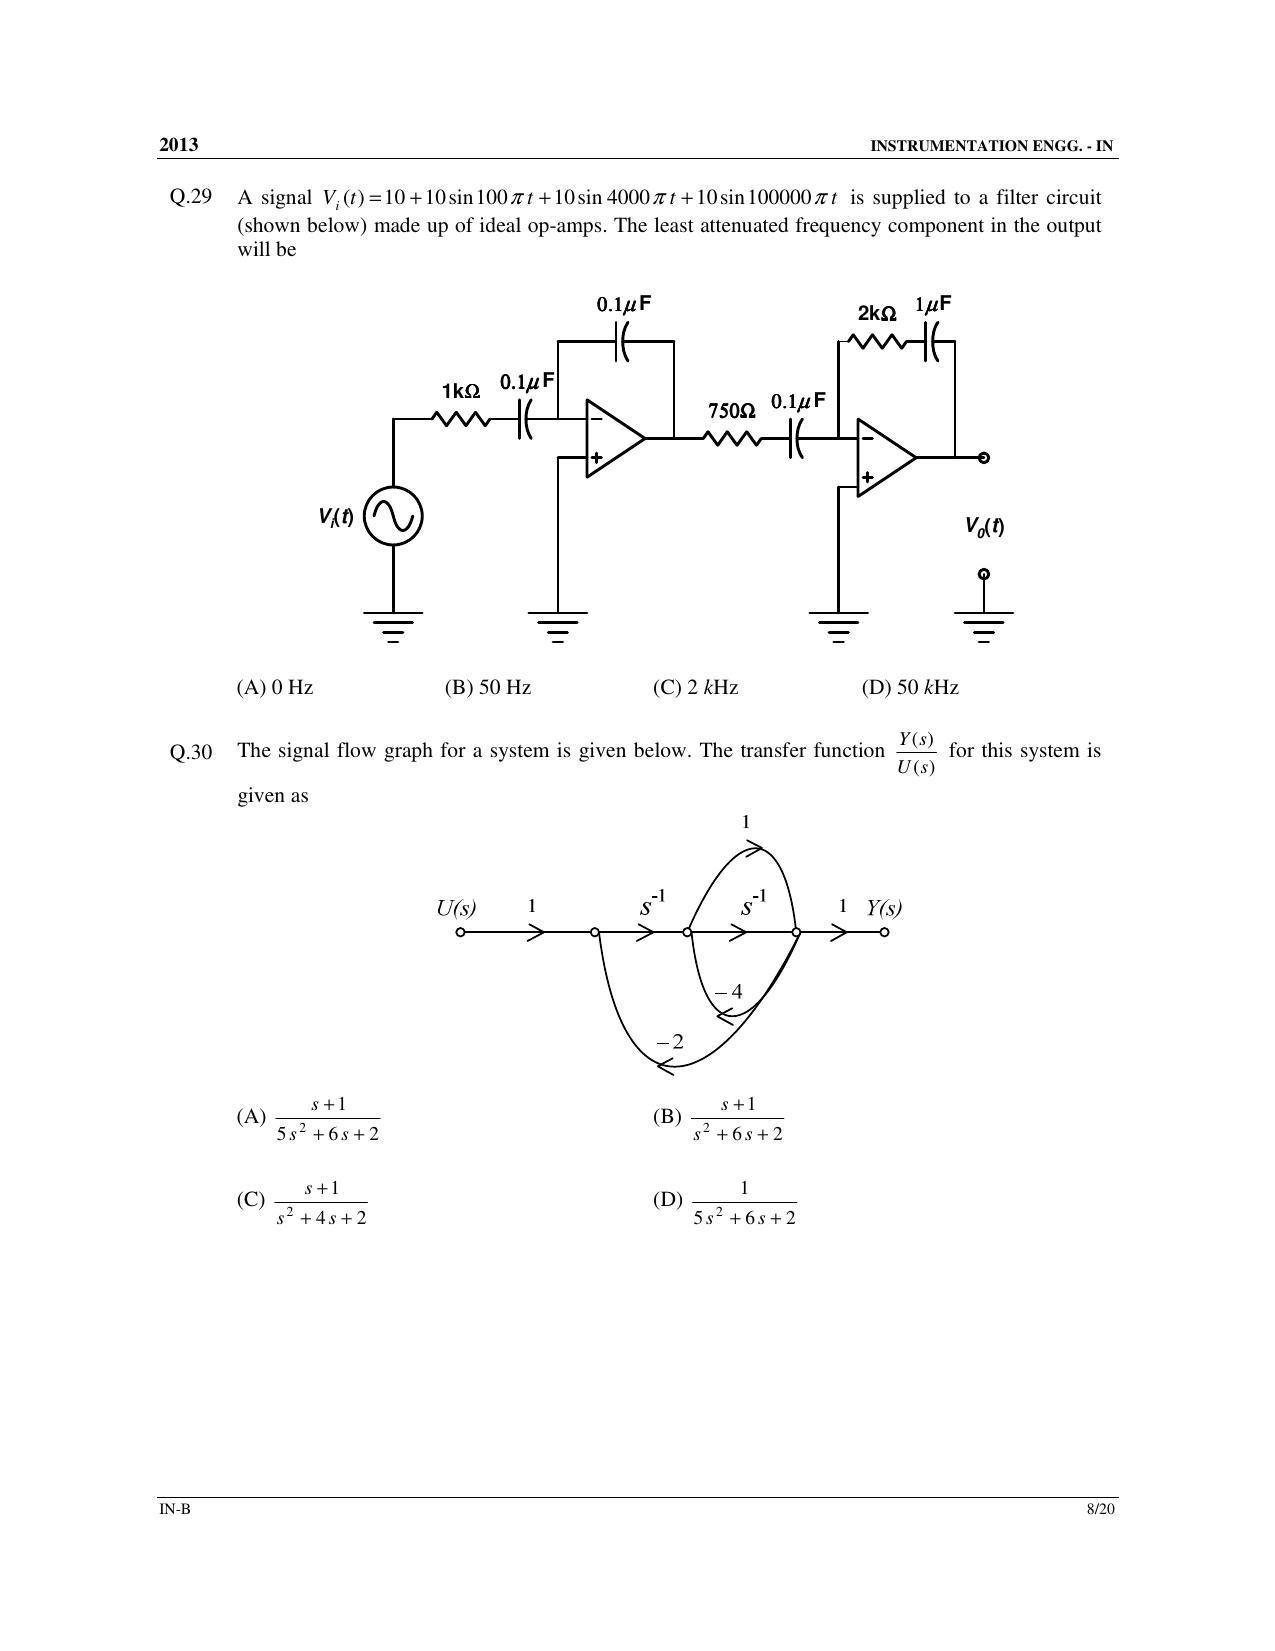 GATE 2013 Instrumentation Engineering (IN) Question Paper with Answer Key - Page 26